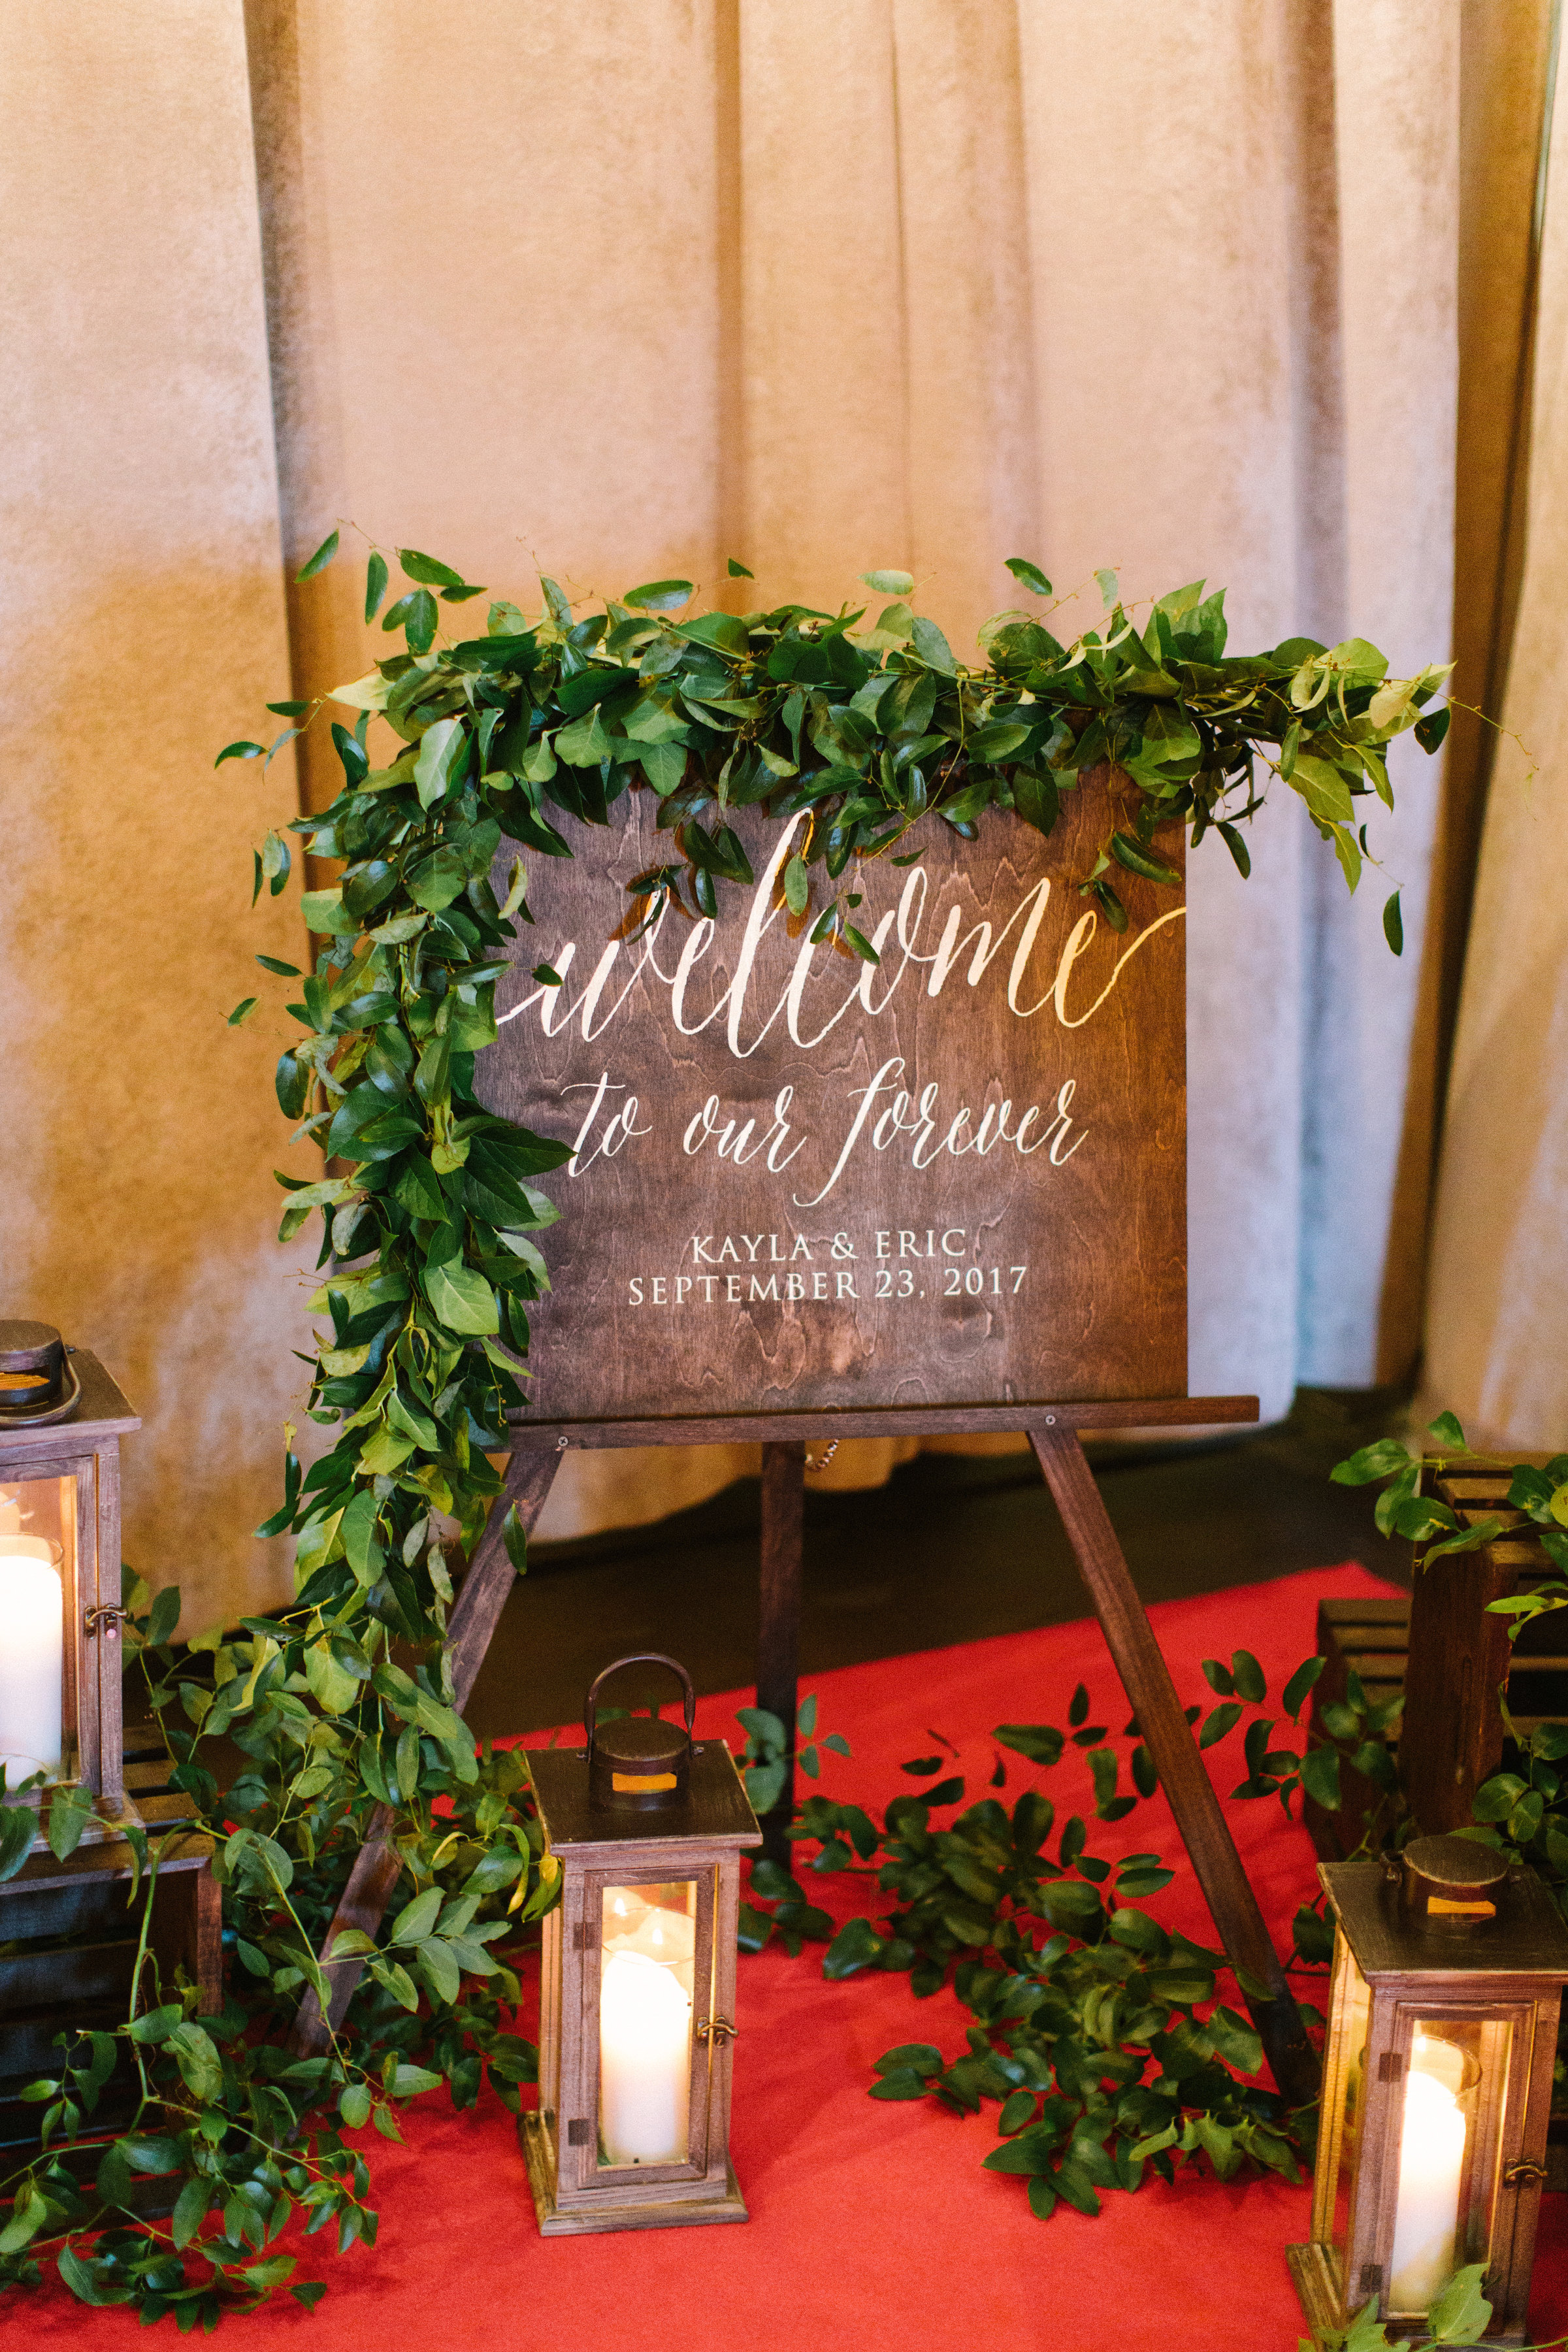 Entry vignette at Bridgeport Art Center wedding in Chicago with welcome sign on easel, lanterns, and foliage garlands.